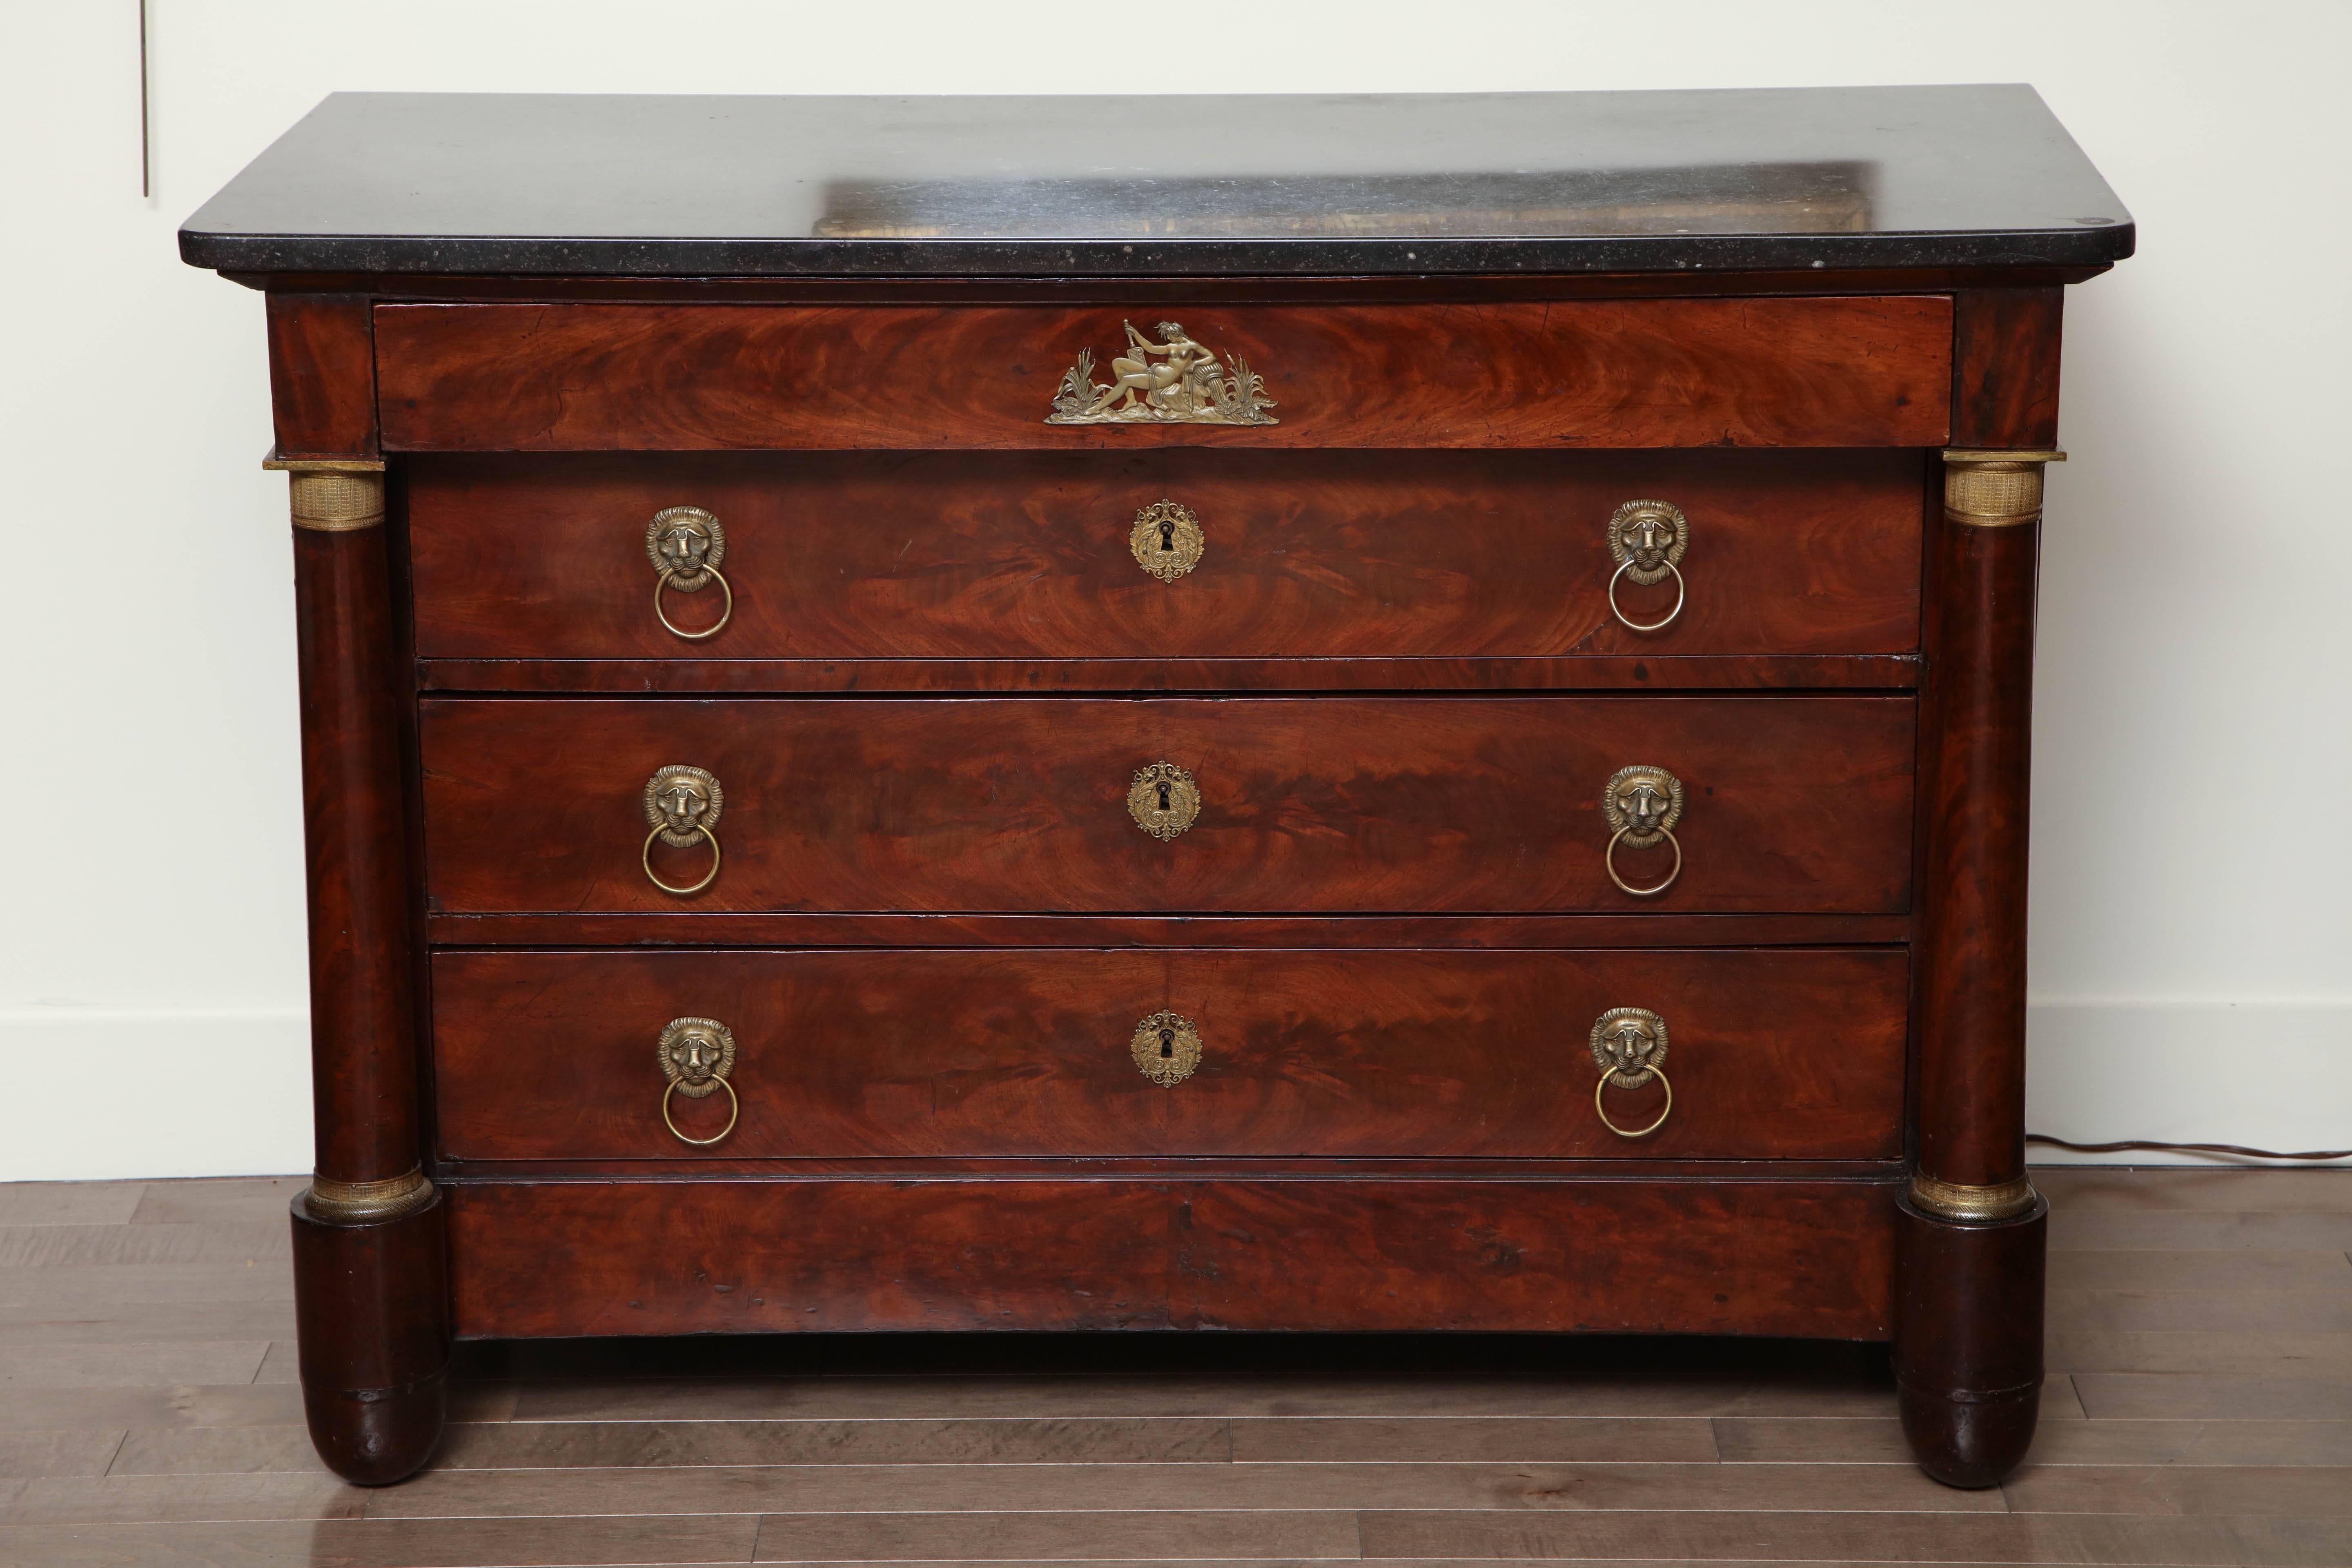 Early 19th century French Empire chest in mahogany with ormolu mounts and a petite granite top.